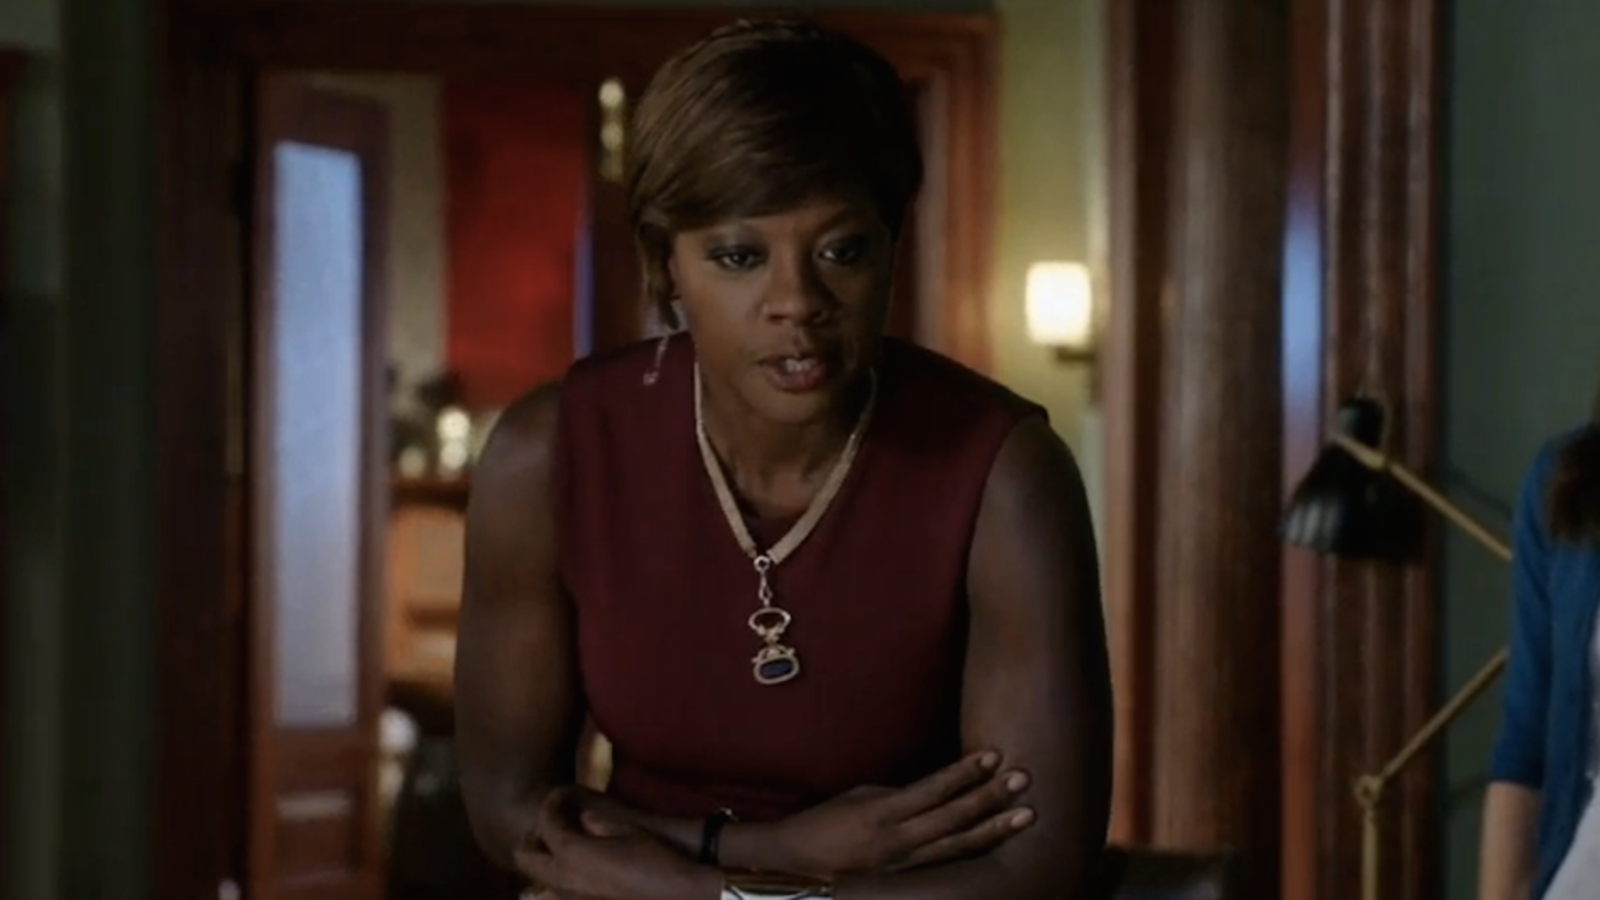 Your How To Get Away With Murder Open Thread